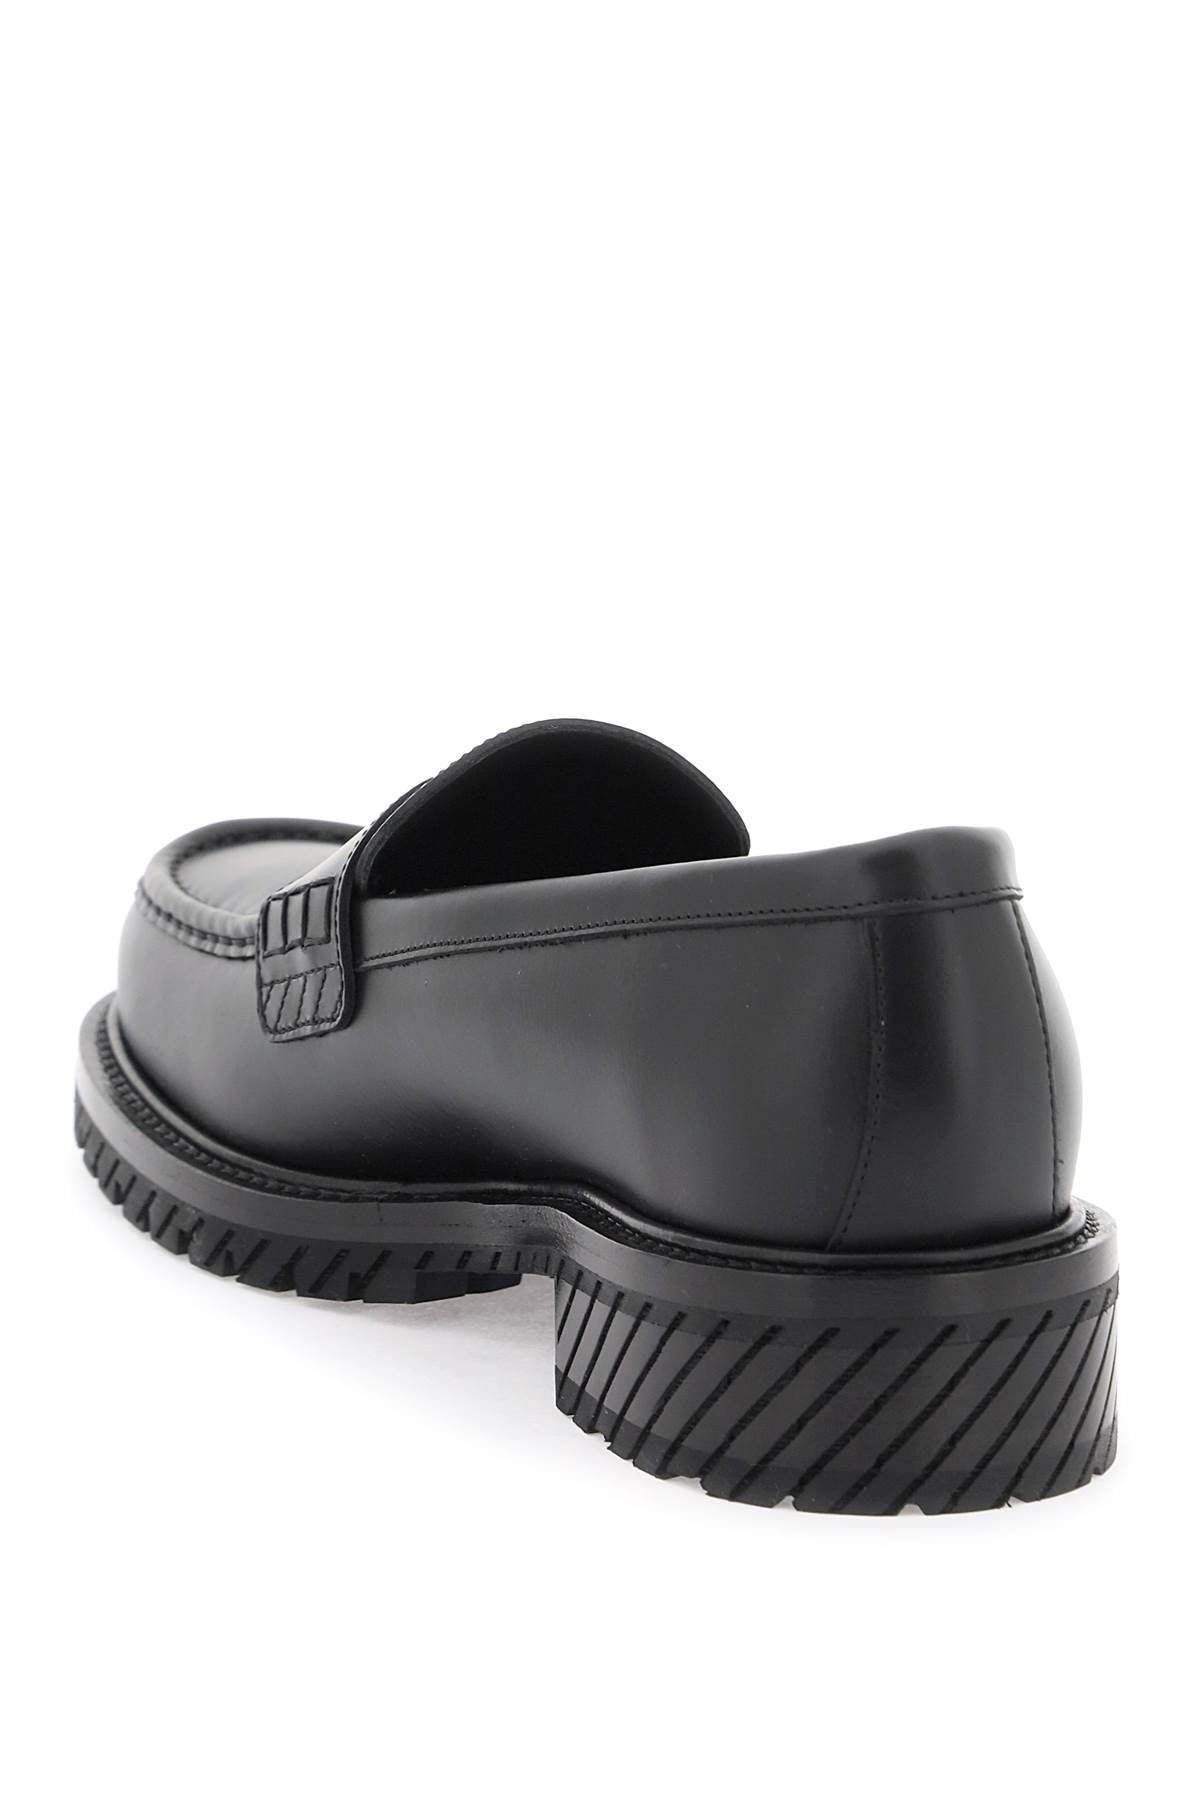 Off-white leather loafers for-2